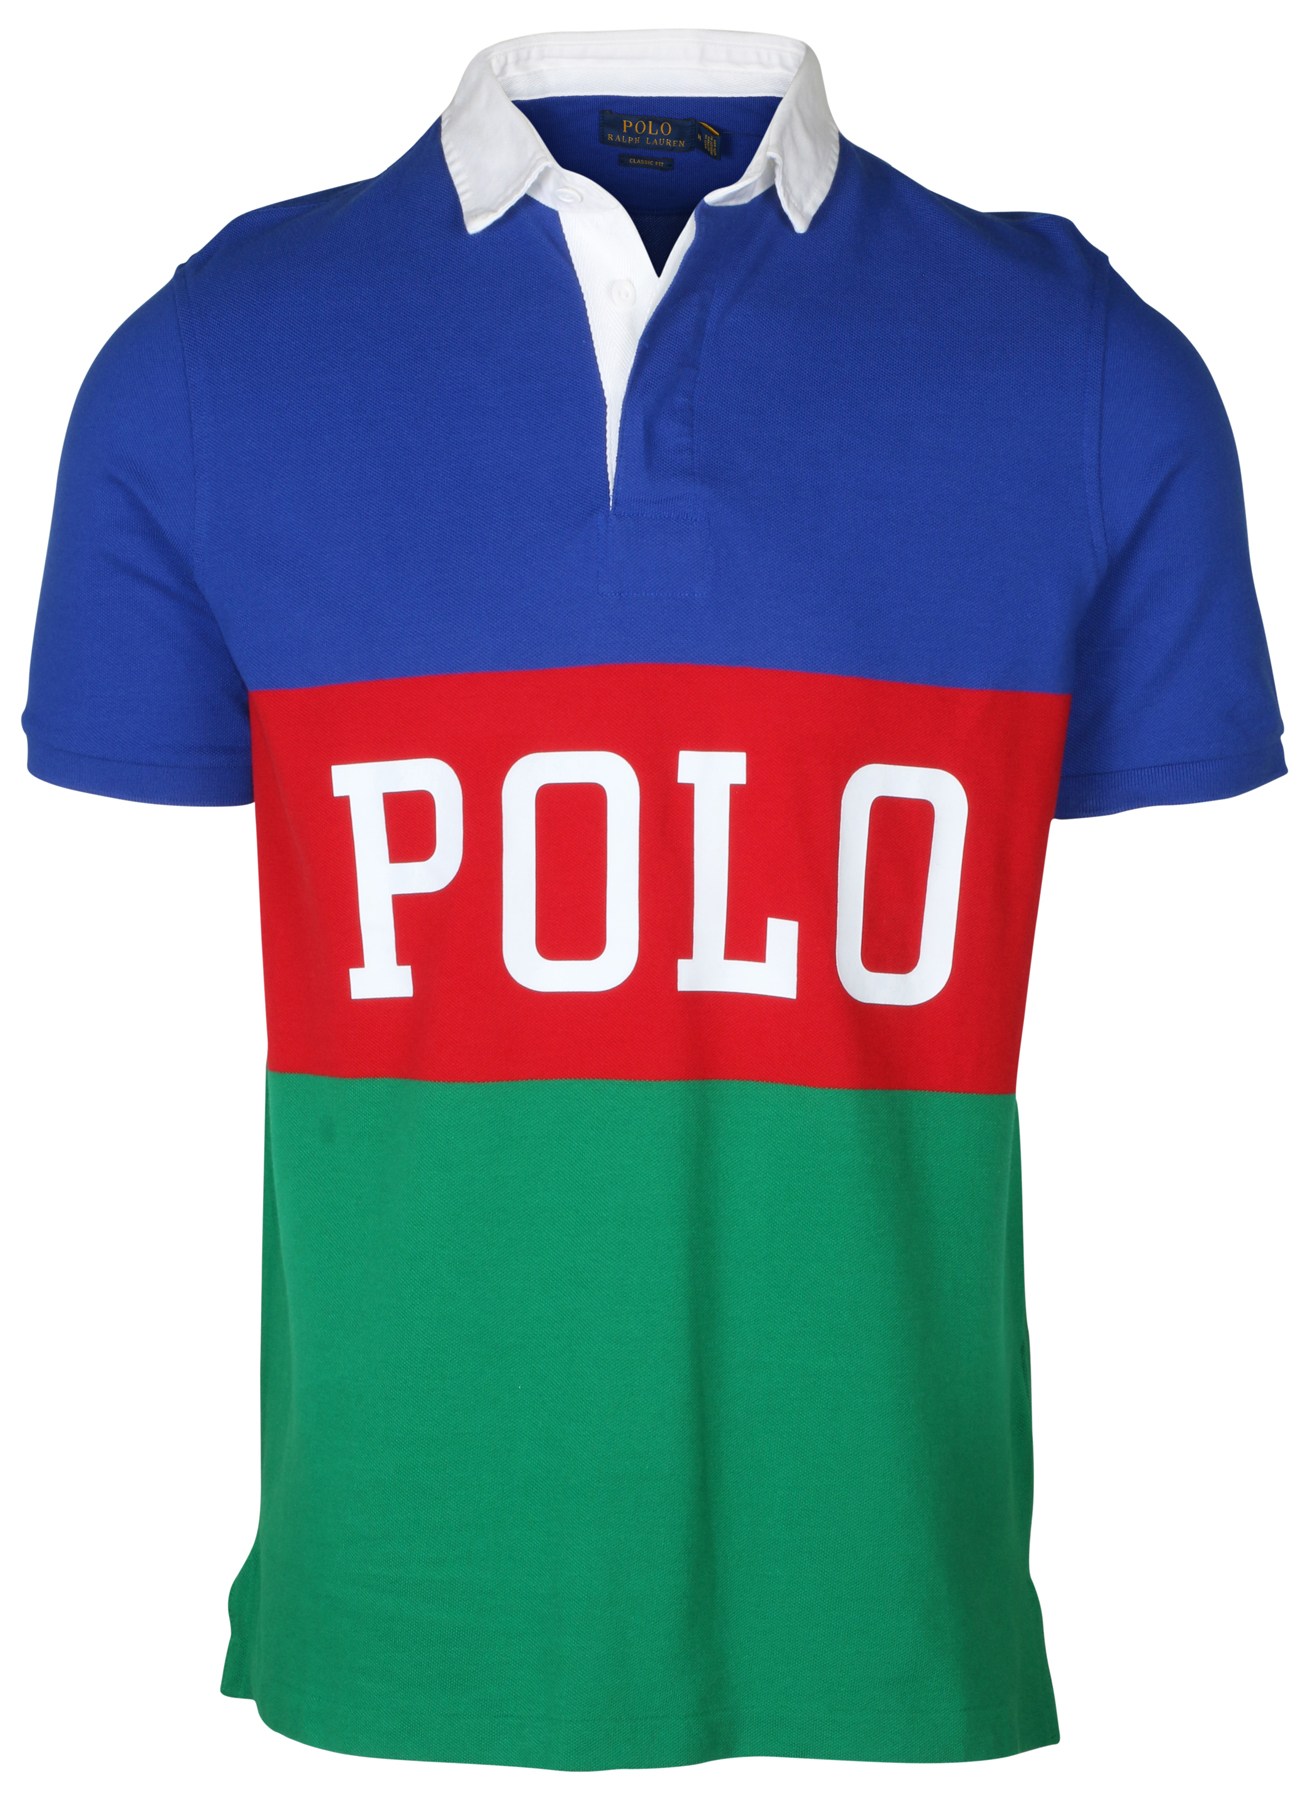 Polo RL Men's Classic Fit Color Rugby Logo Polo | eBay